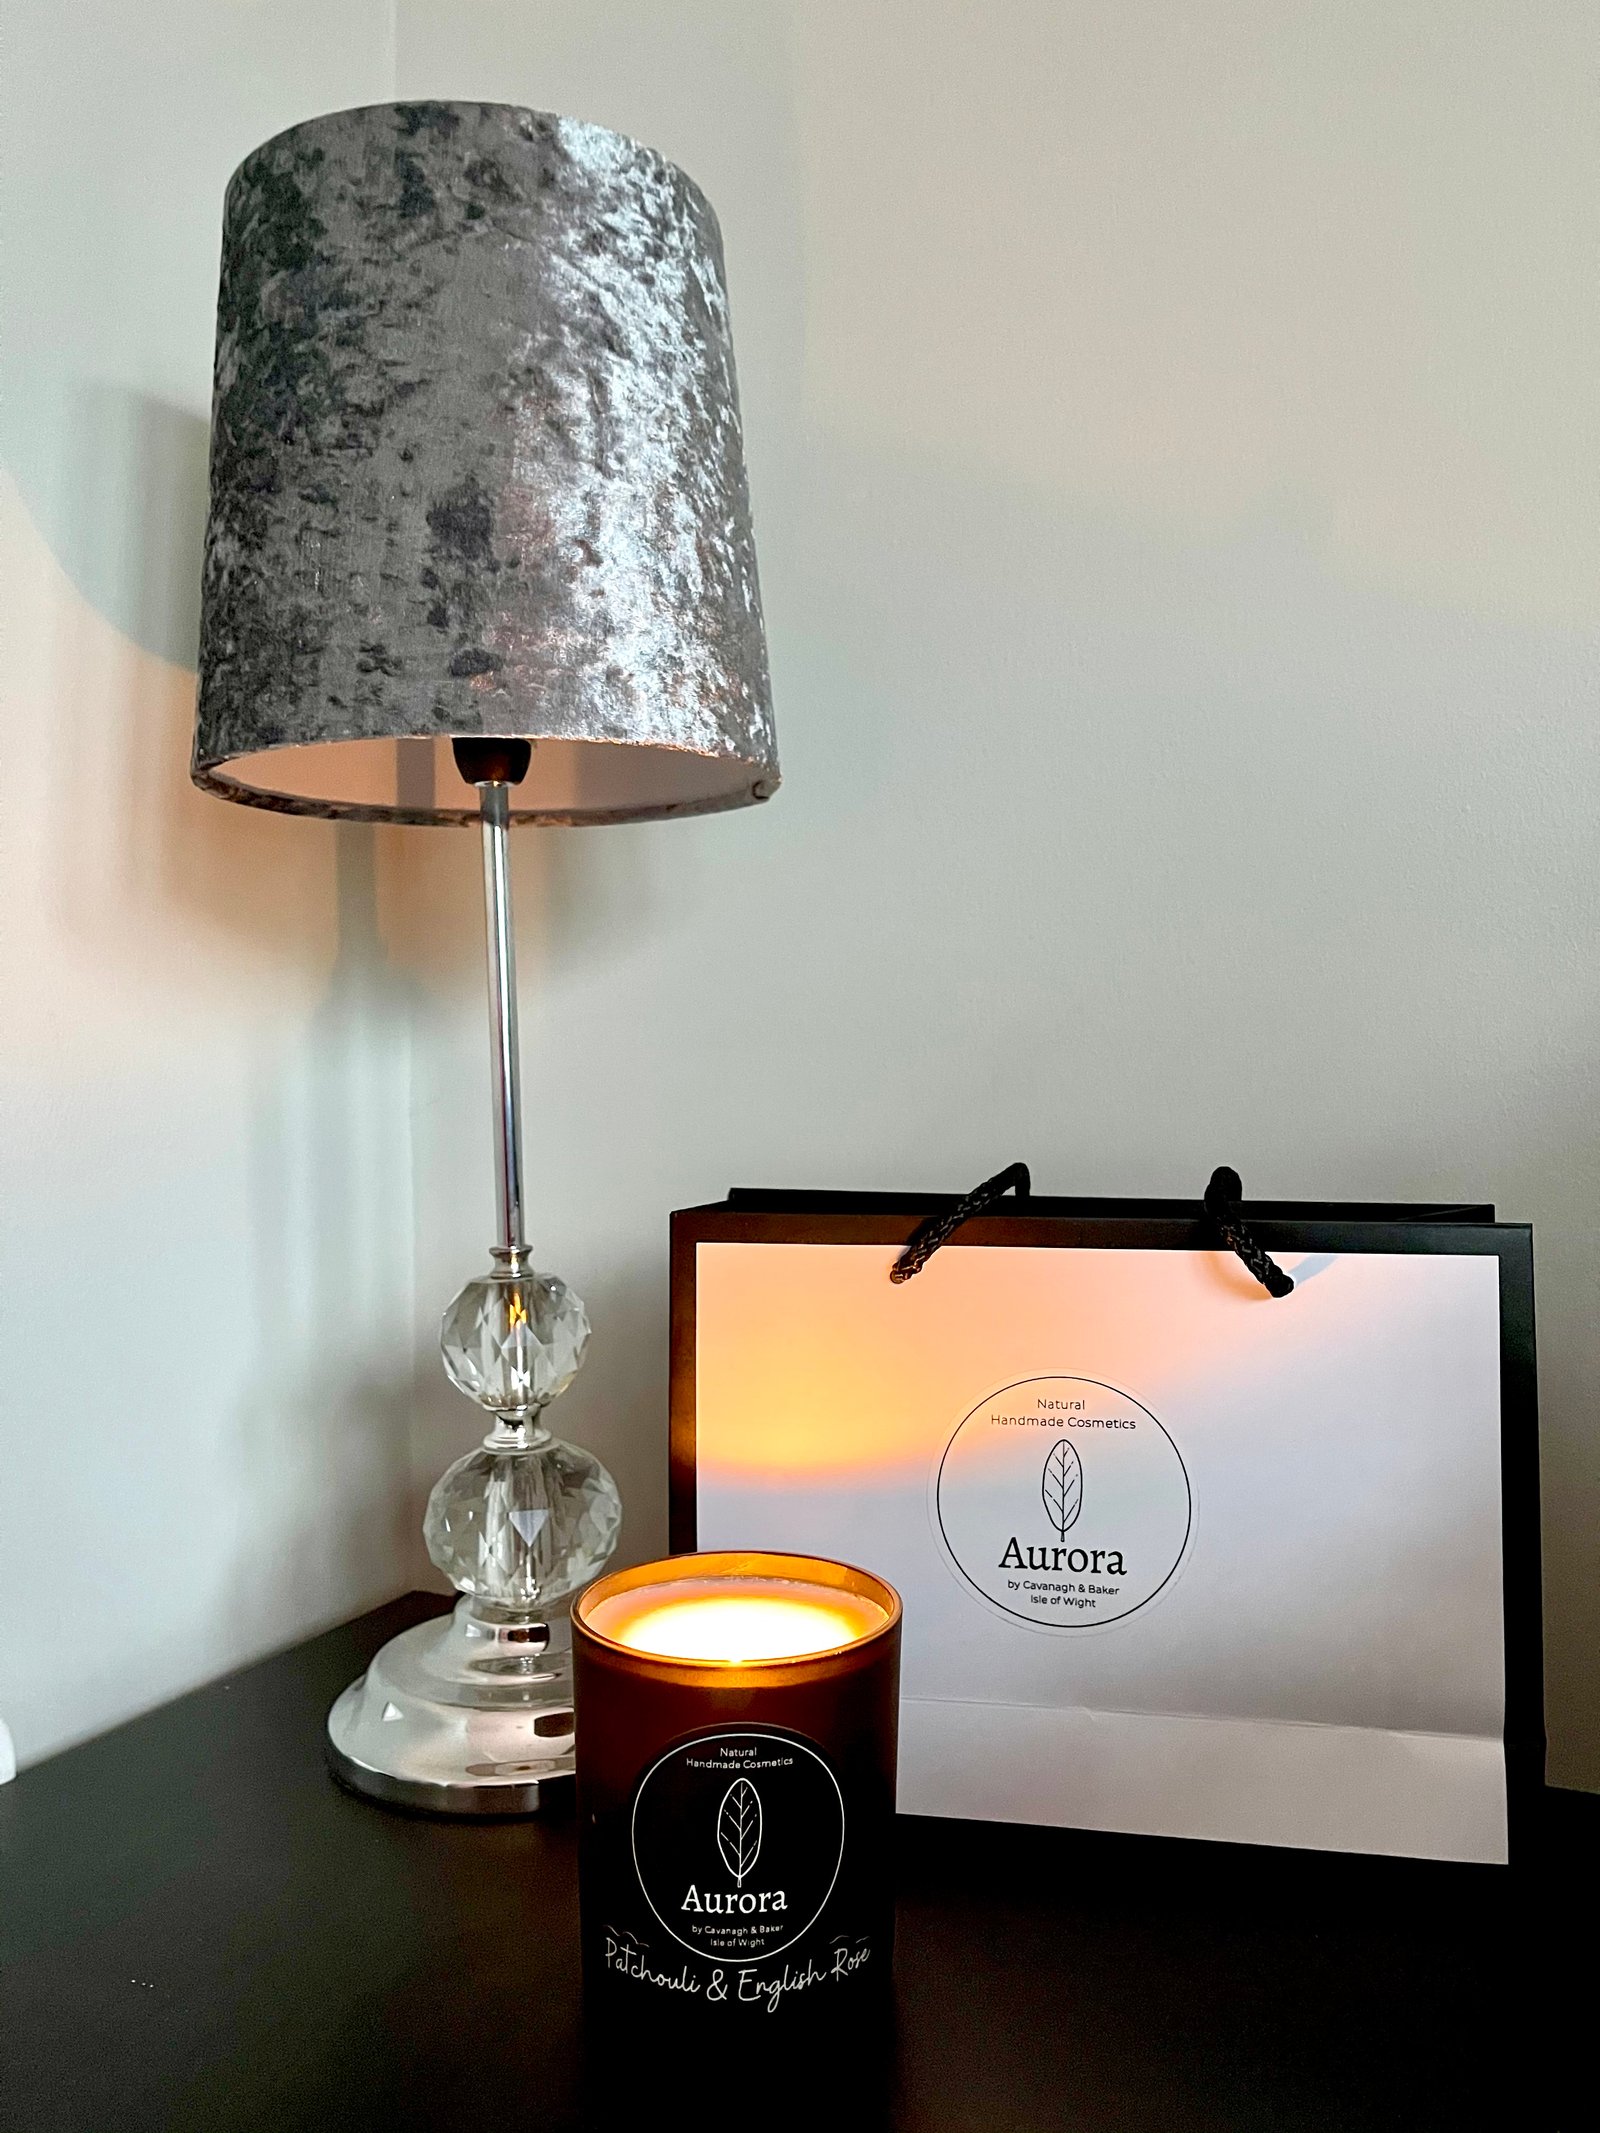 Black aurora cosmetics candle in Lei Hang living room side table with a grey velvet and crystal table lamp and a white aurora paper bag.